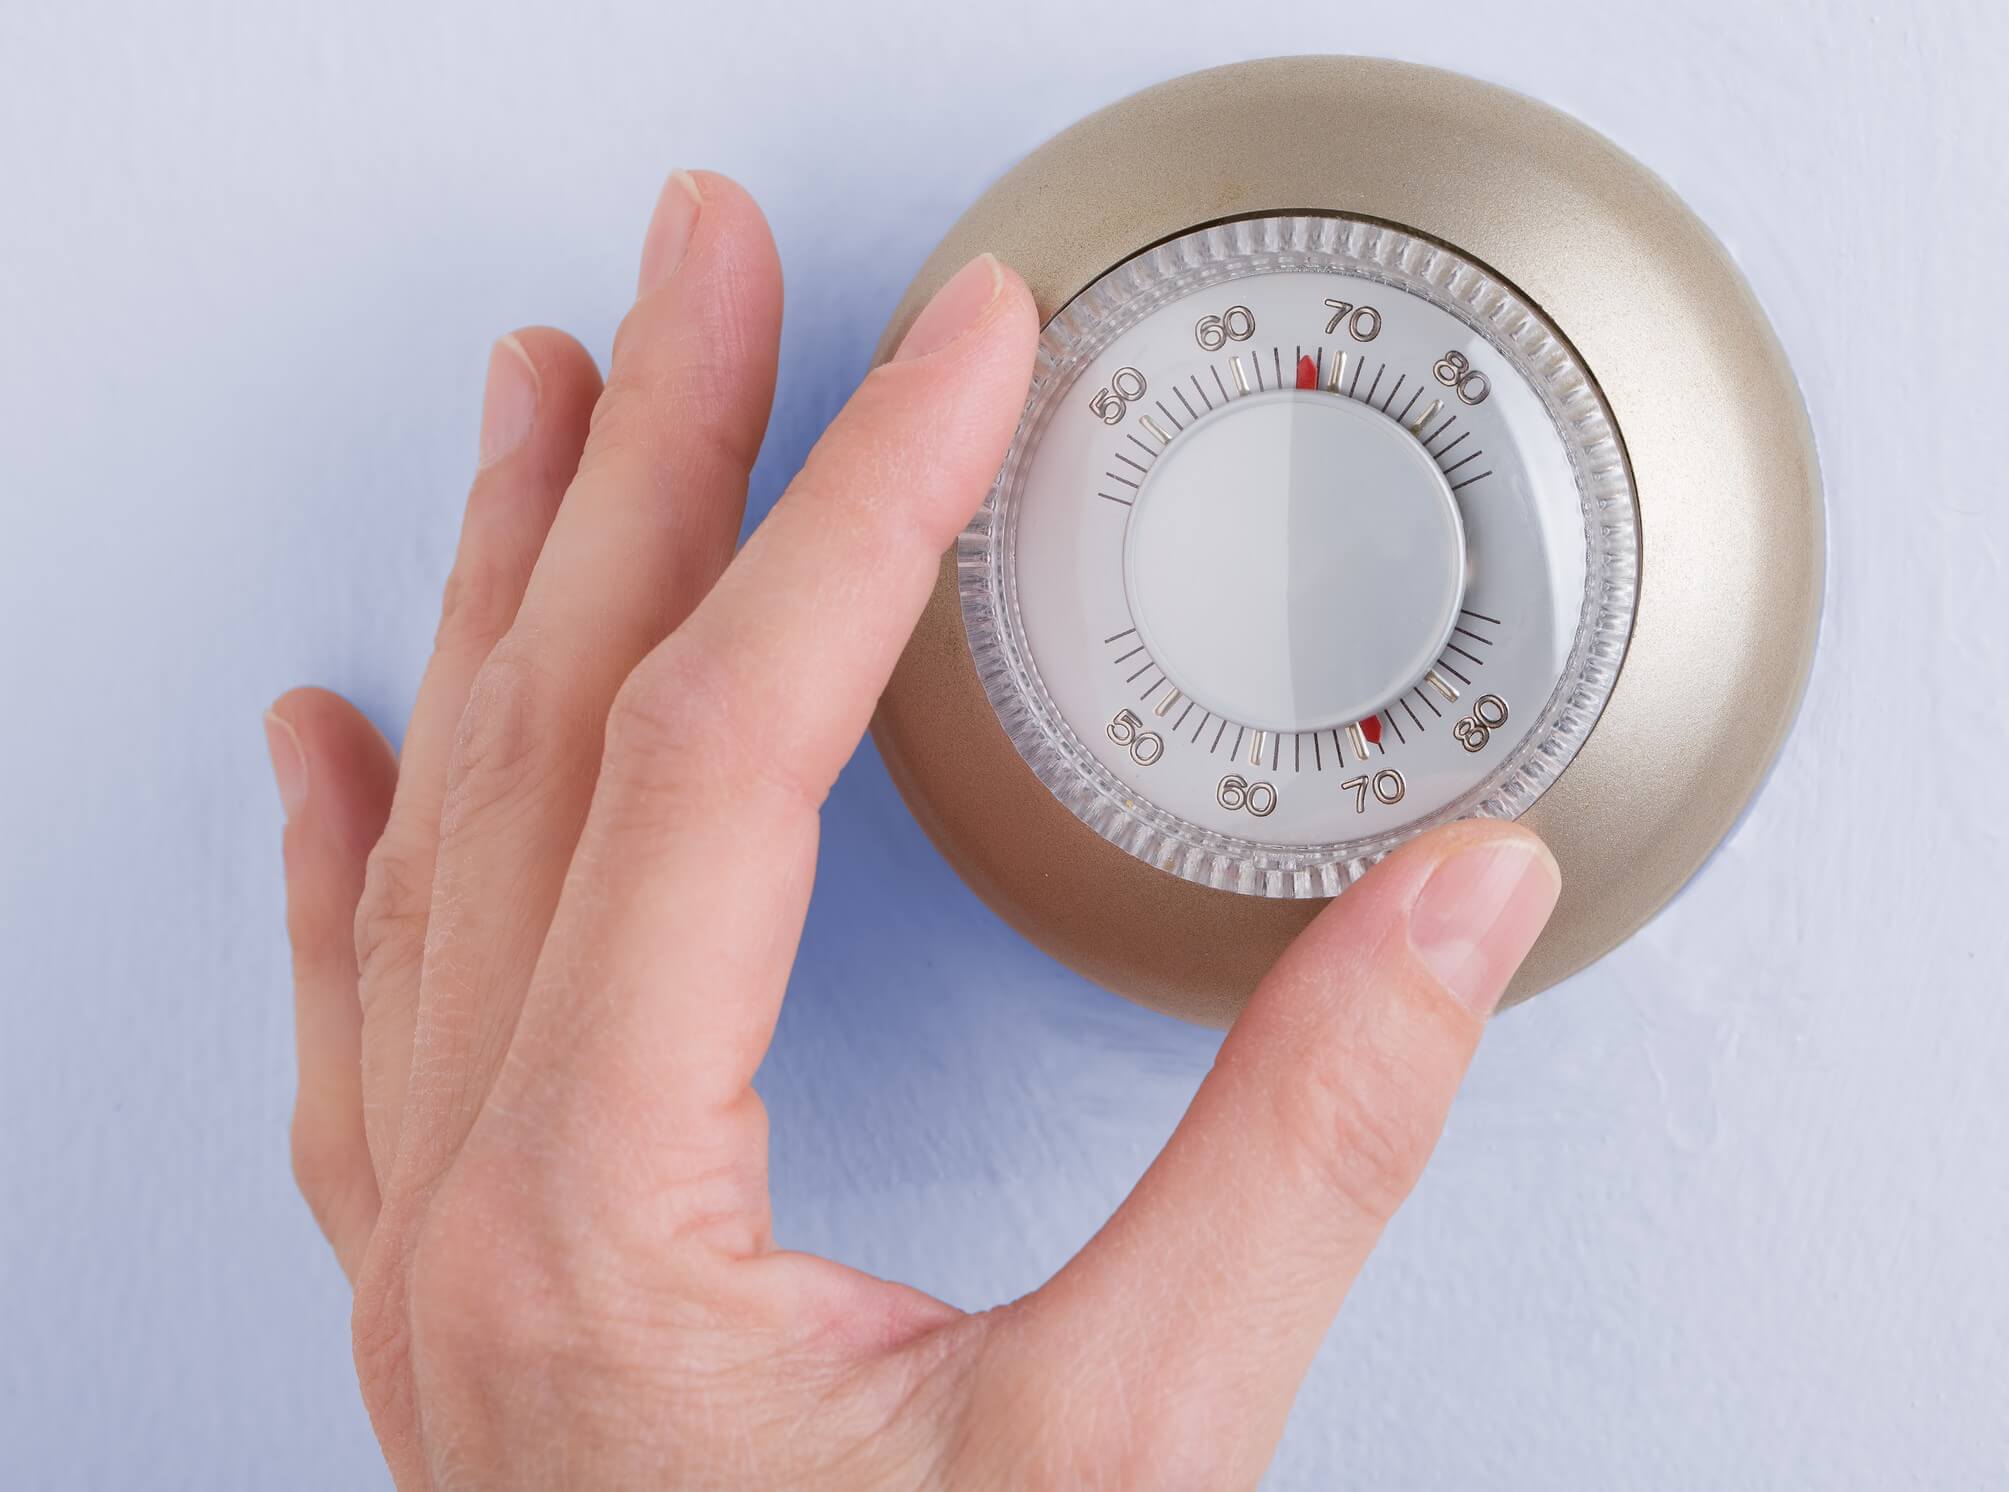 Do You Really Need a Furnace Replacement, or Does Your Home Have a Humidity Issue?